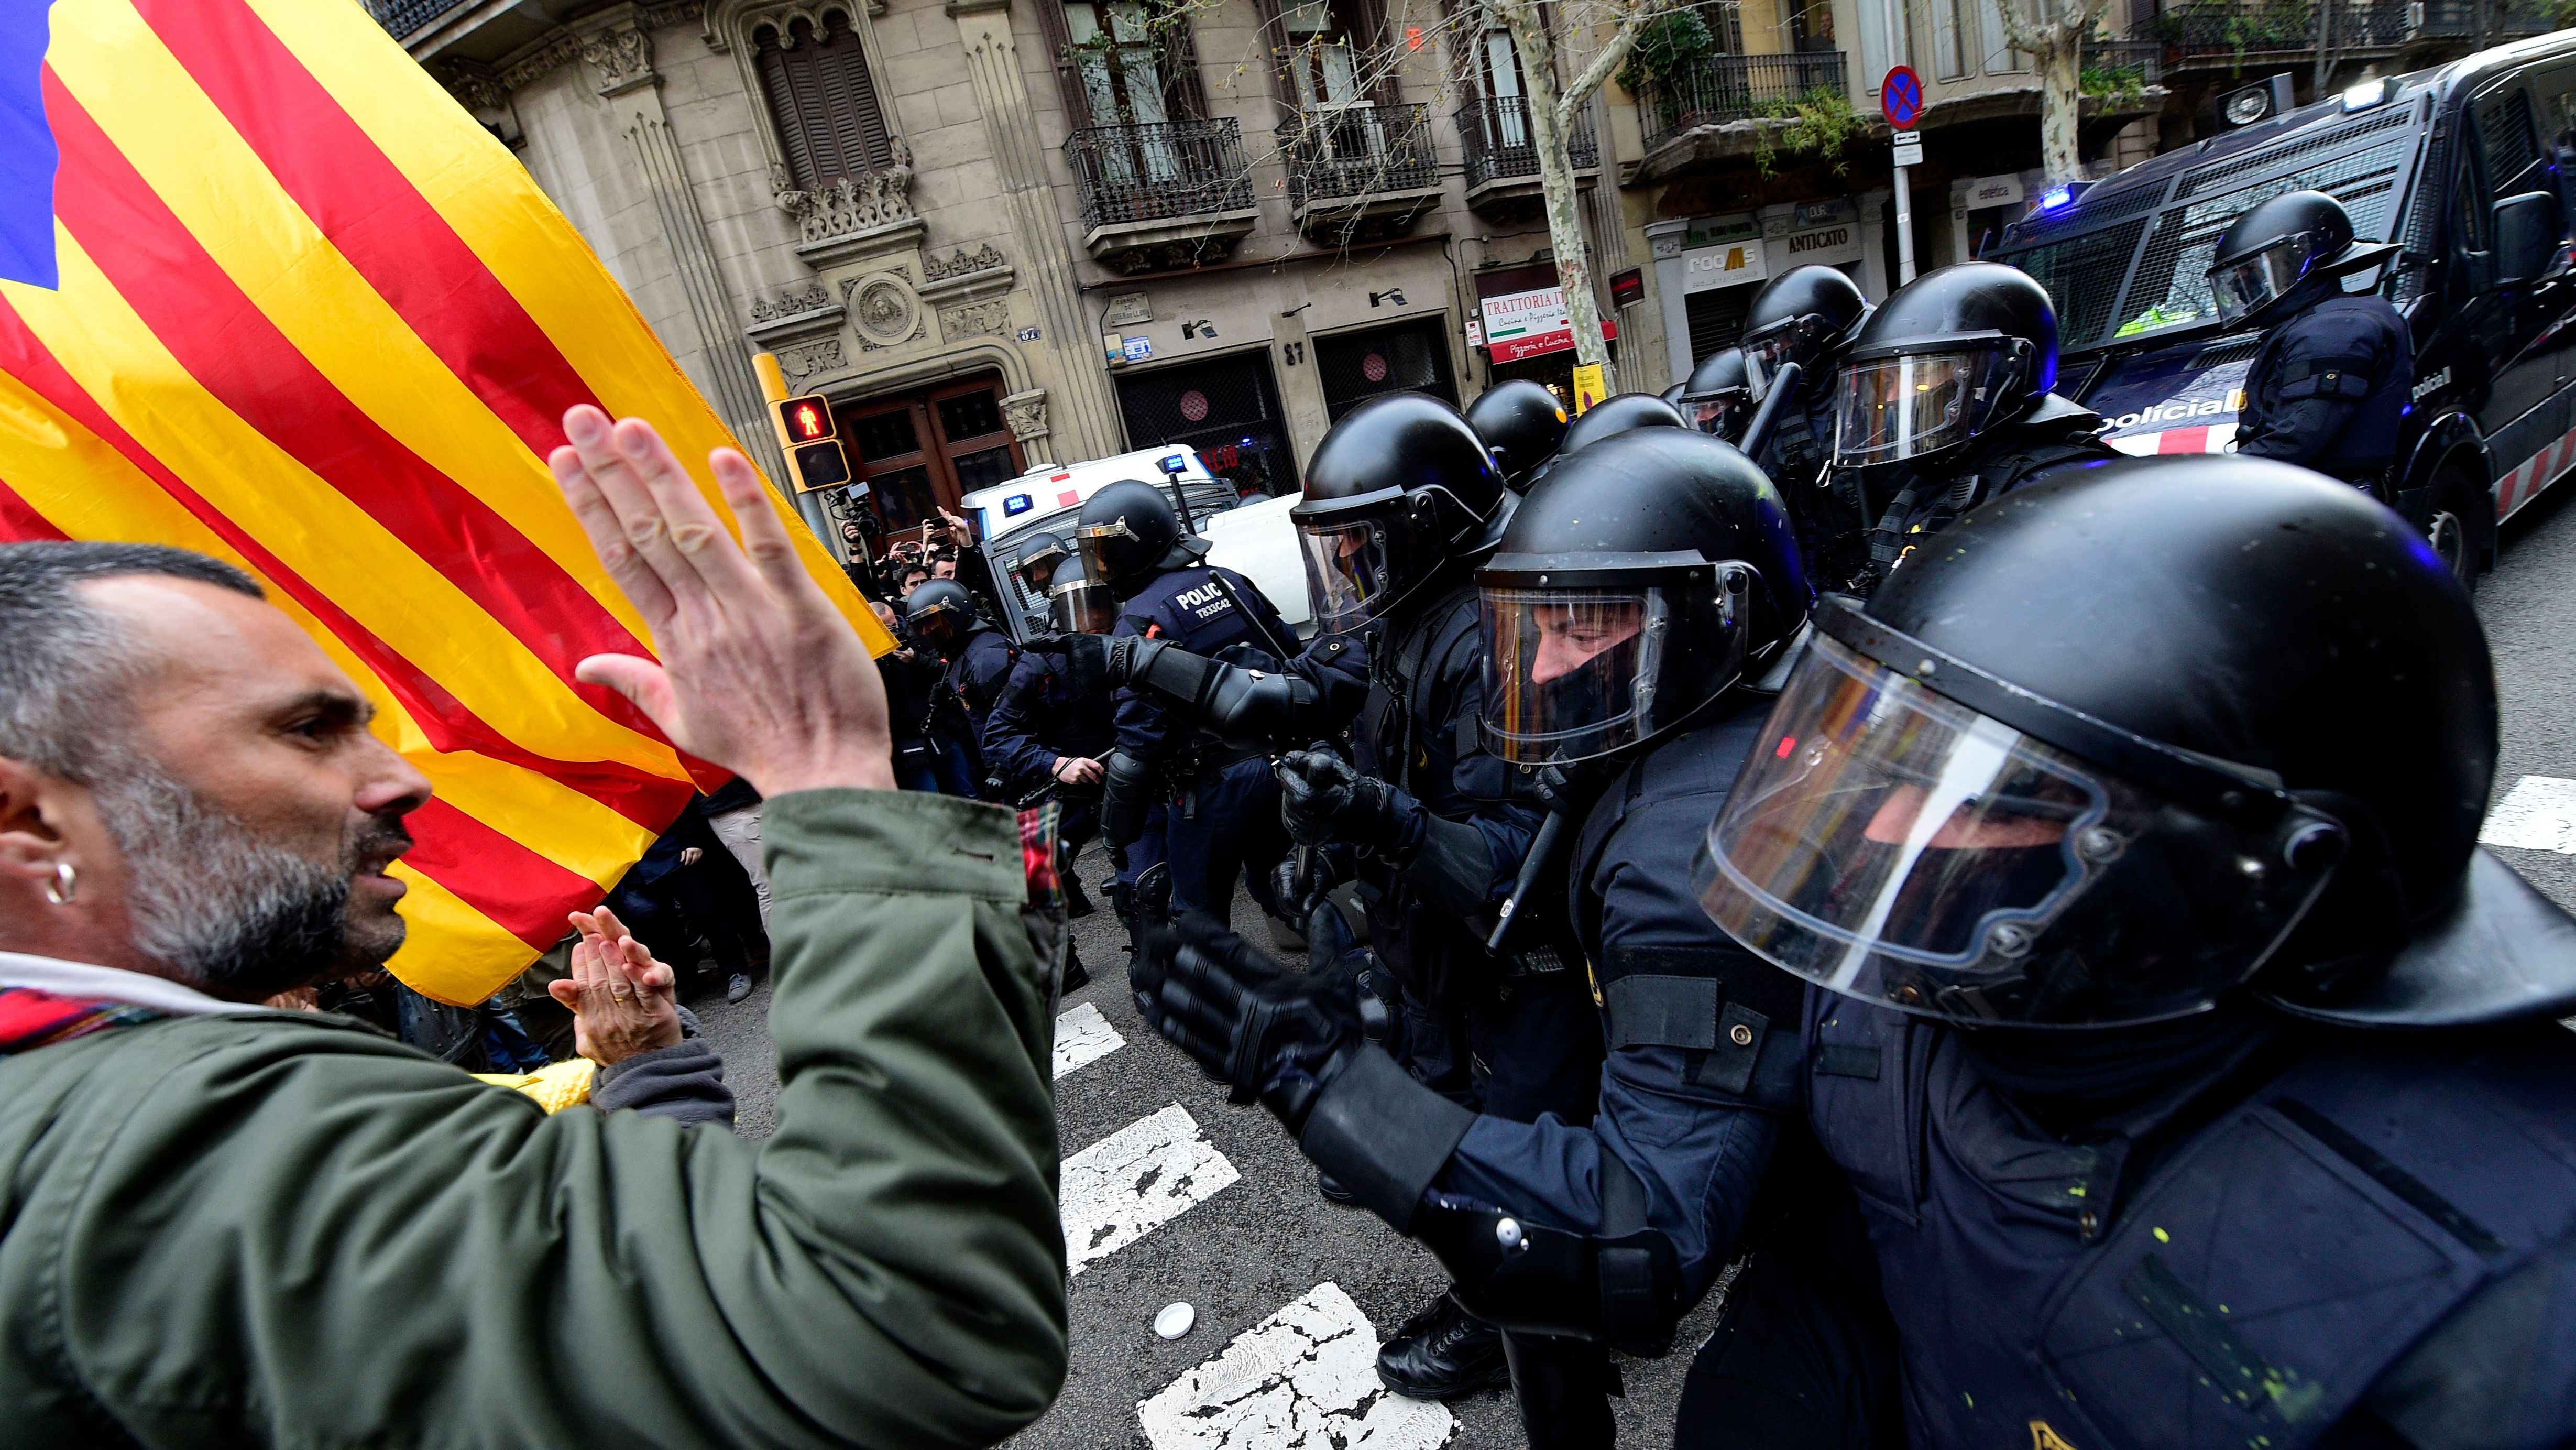 Protesters scuffle with riot police at a demonstration in Barcelona on March 25, 2018.